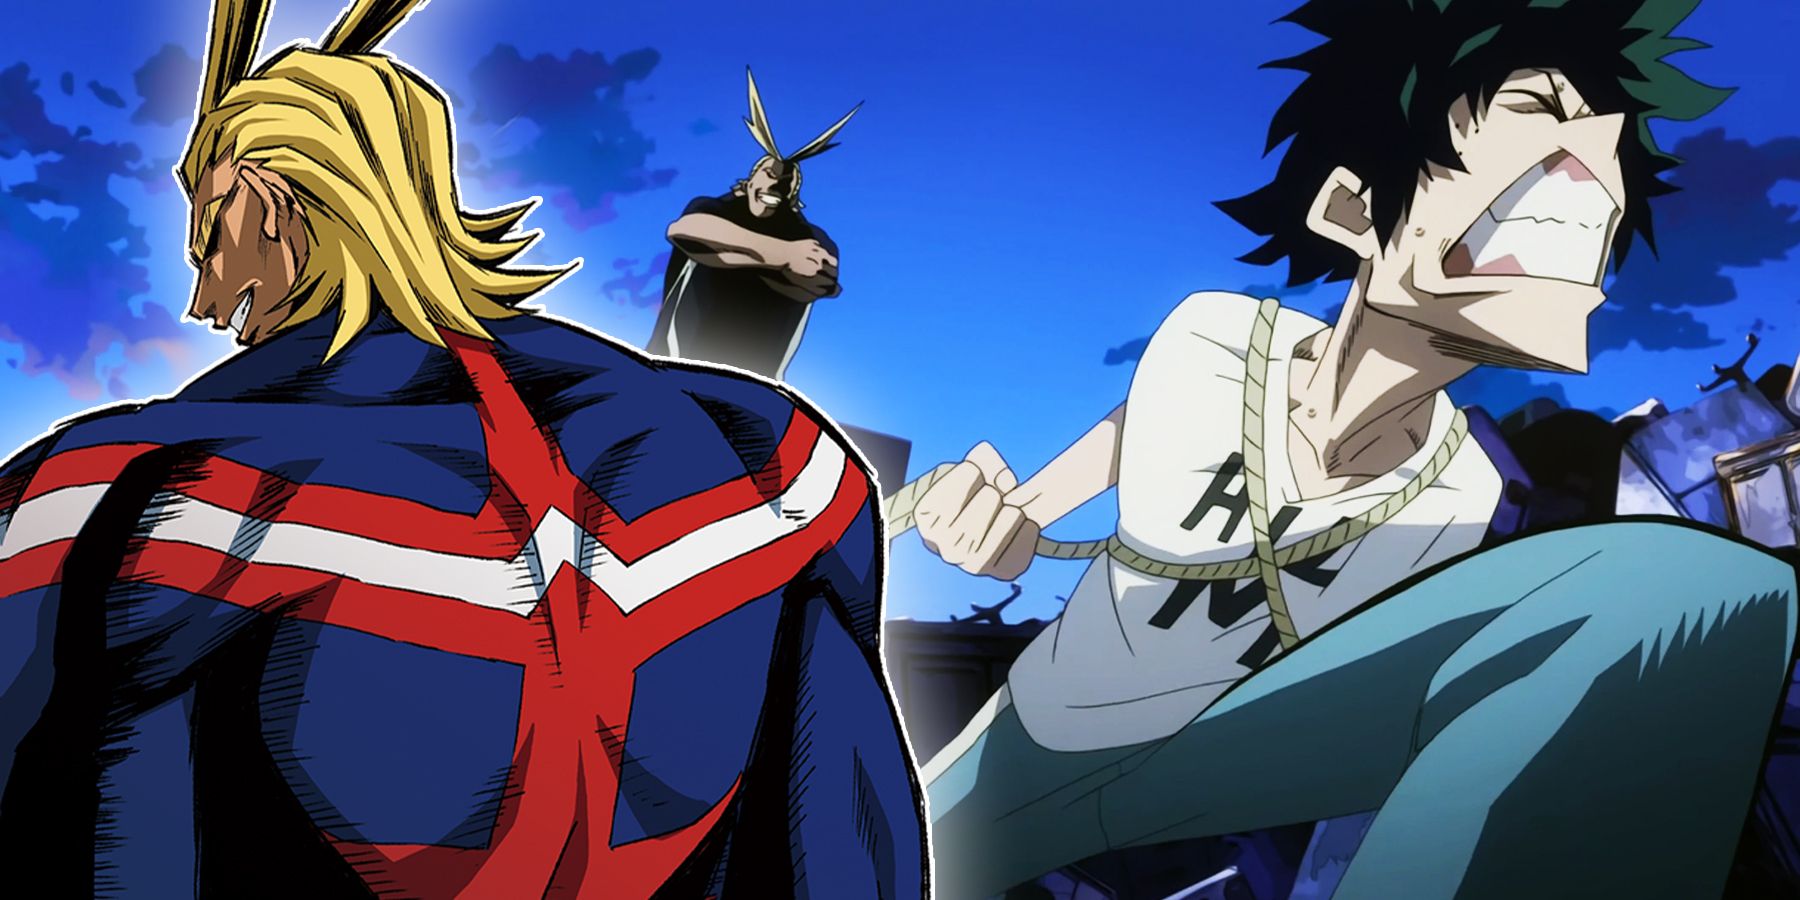 What Nobody Realized About All Might In My Hero Academia - YouTube